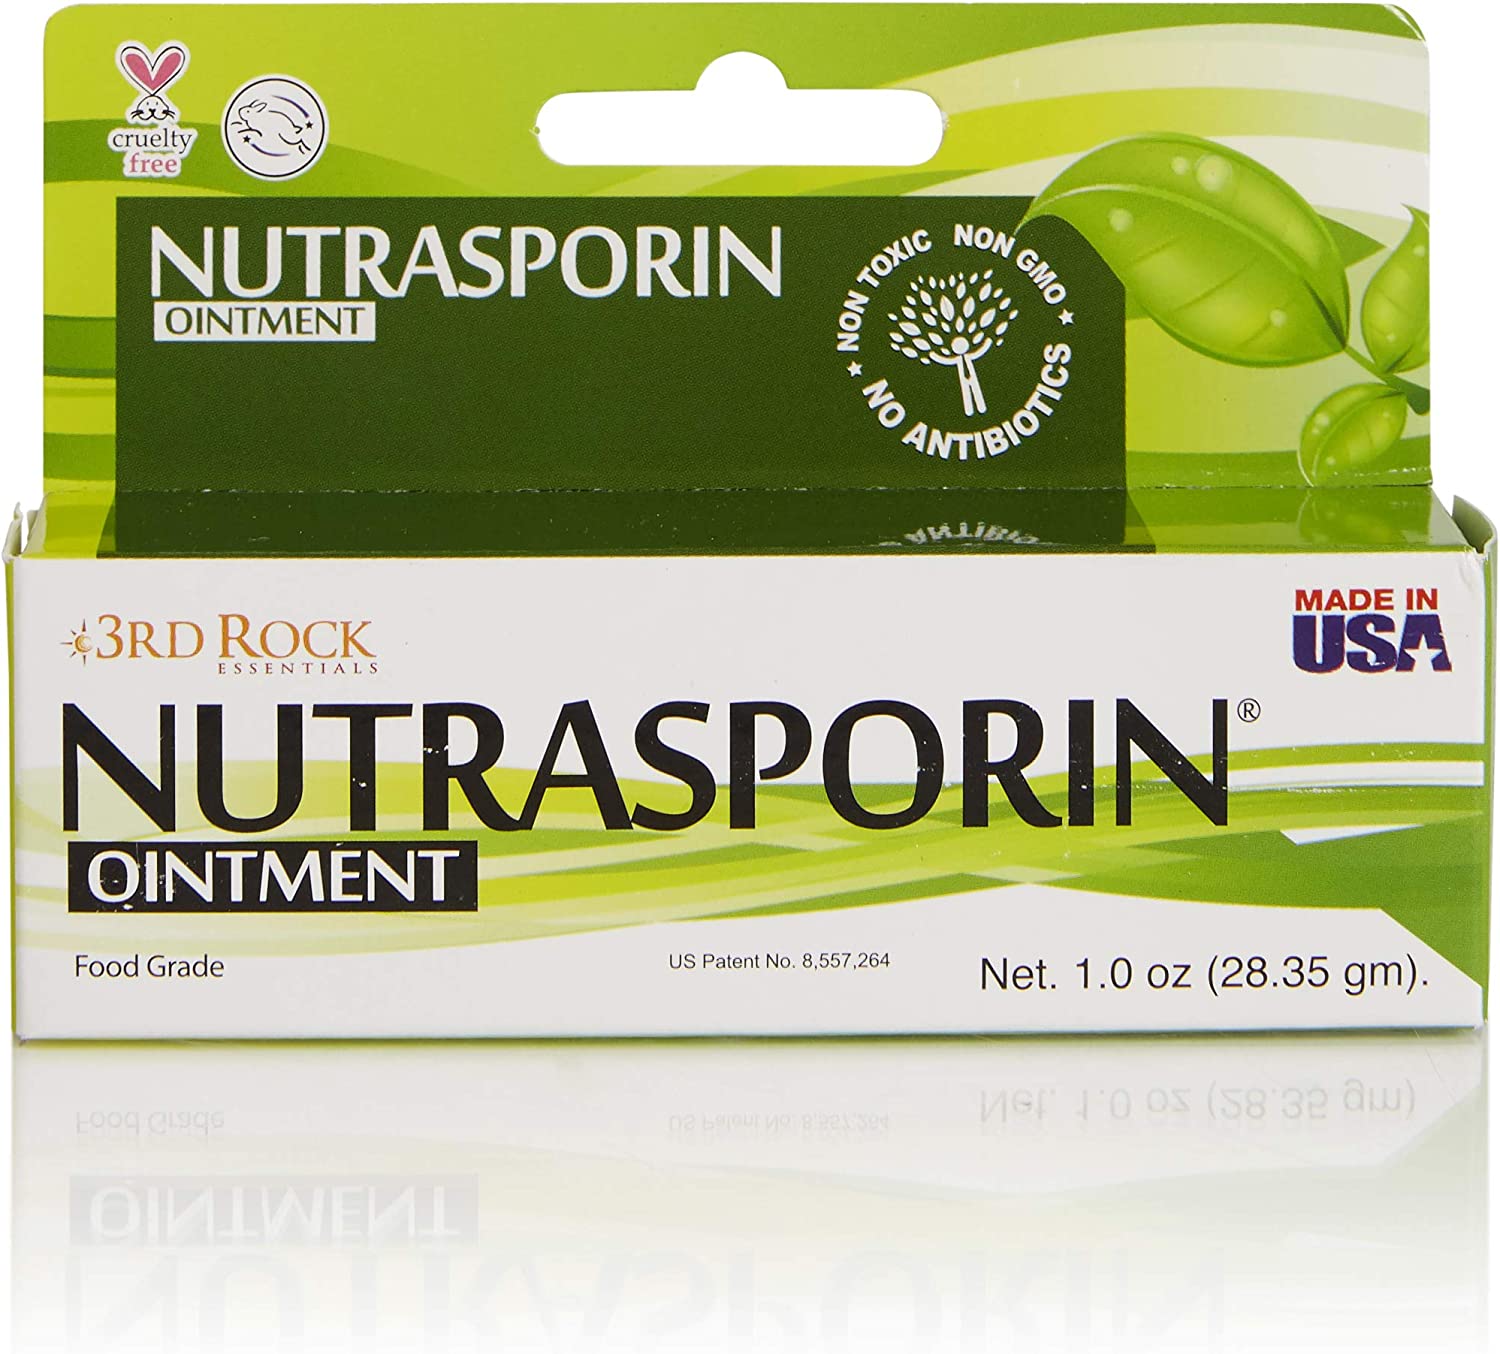 3rd Rock Essentials Nutrasporin Silver Ointment, Toxic-Free, Petroleum-Free, Non-Antibiotic, First Aid, Food Grade Ointment, 1.0oz, Pack of 1